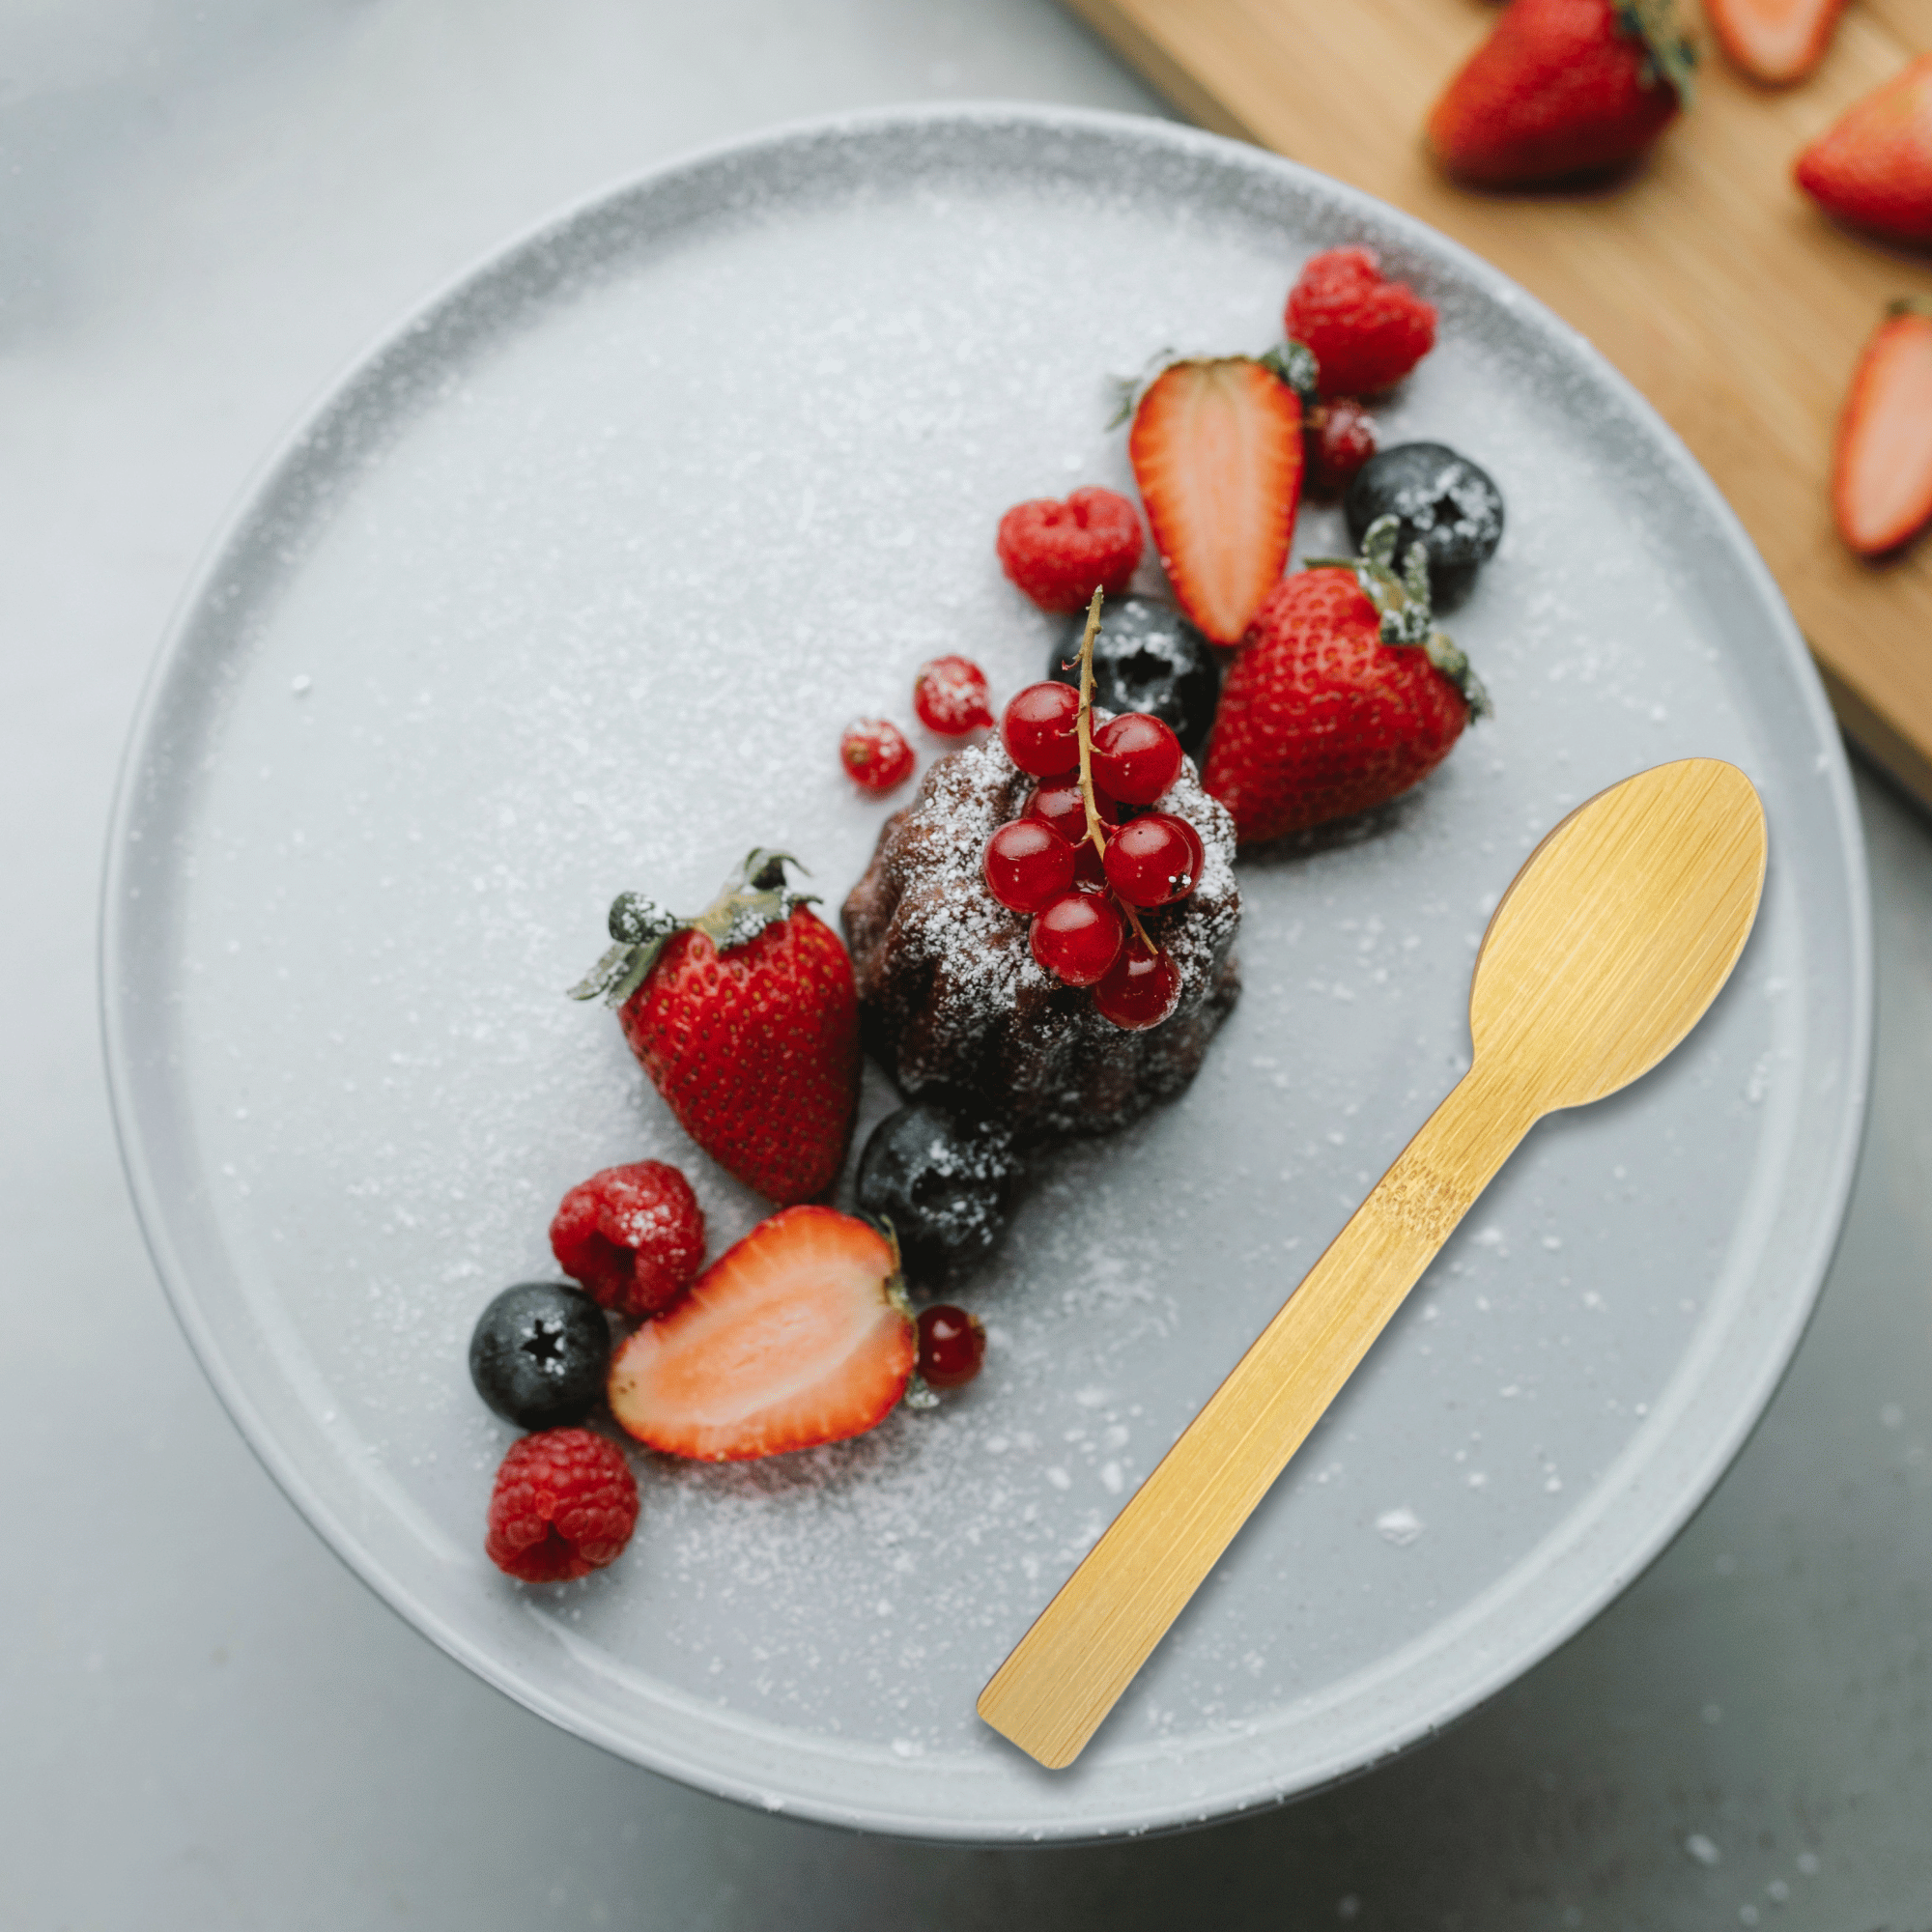 A bamboo spoon from Holy City Straw Co. lies next to a chocolate dessert sprinkled with powdered sugar, adorned with a sprig of red currants. The plate is artistically arranged with fresh strawberries, blueberries, raspberries, and slices of strawberries, on a light grey ceramic plate with a soft-focus wooden surface in the background.